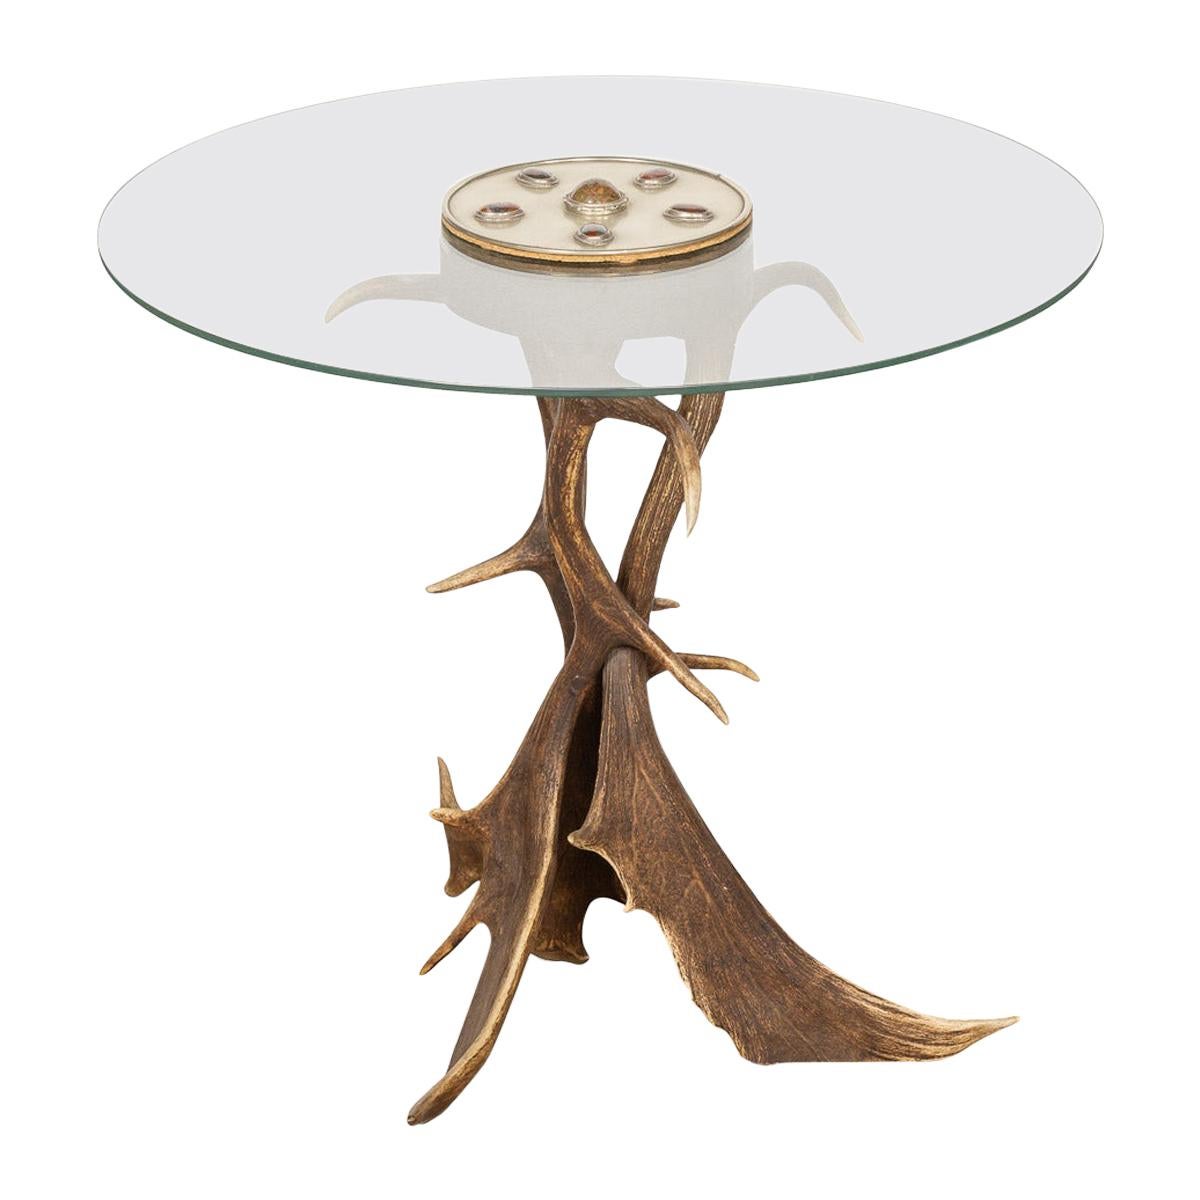 Unusual Antler Horn Side Table by Anthony Redmile, London, circa 1970